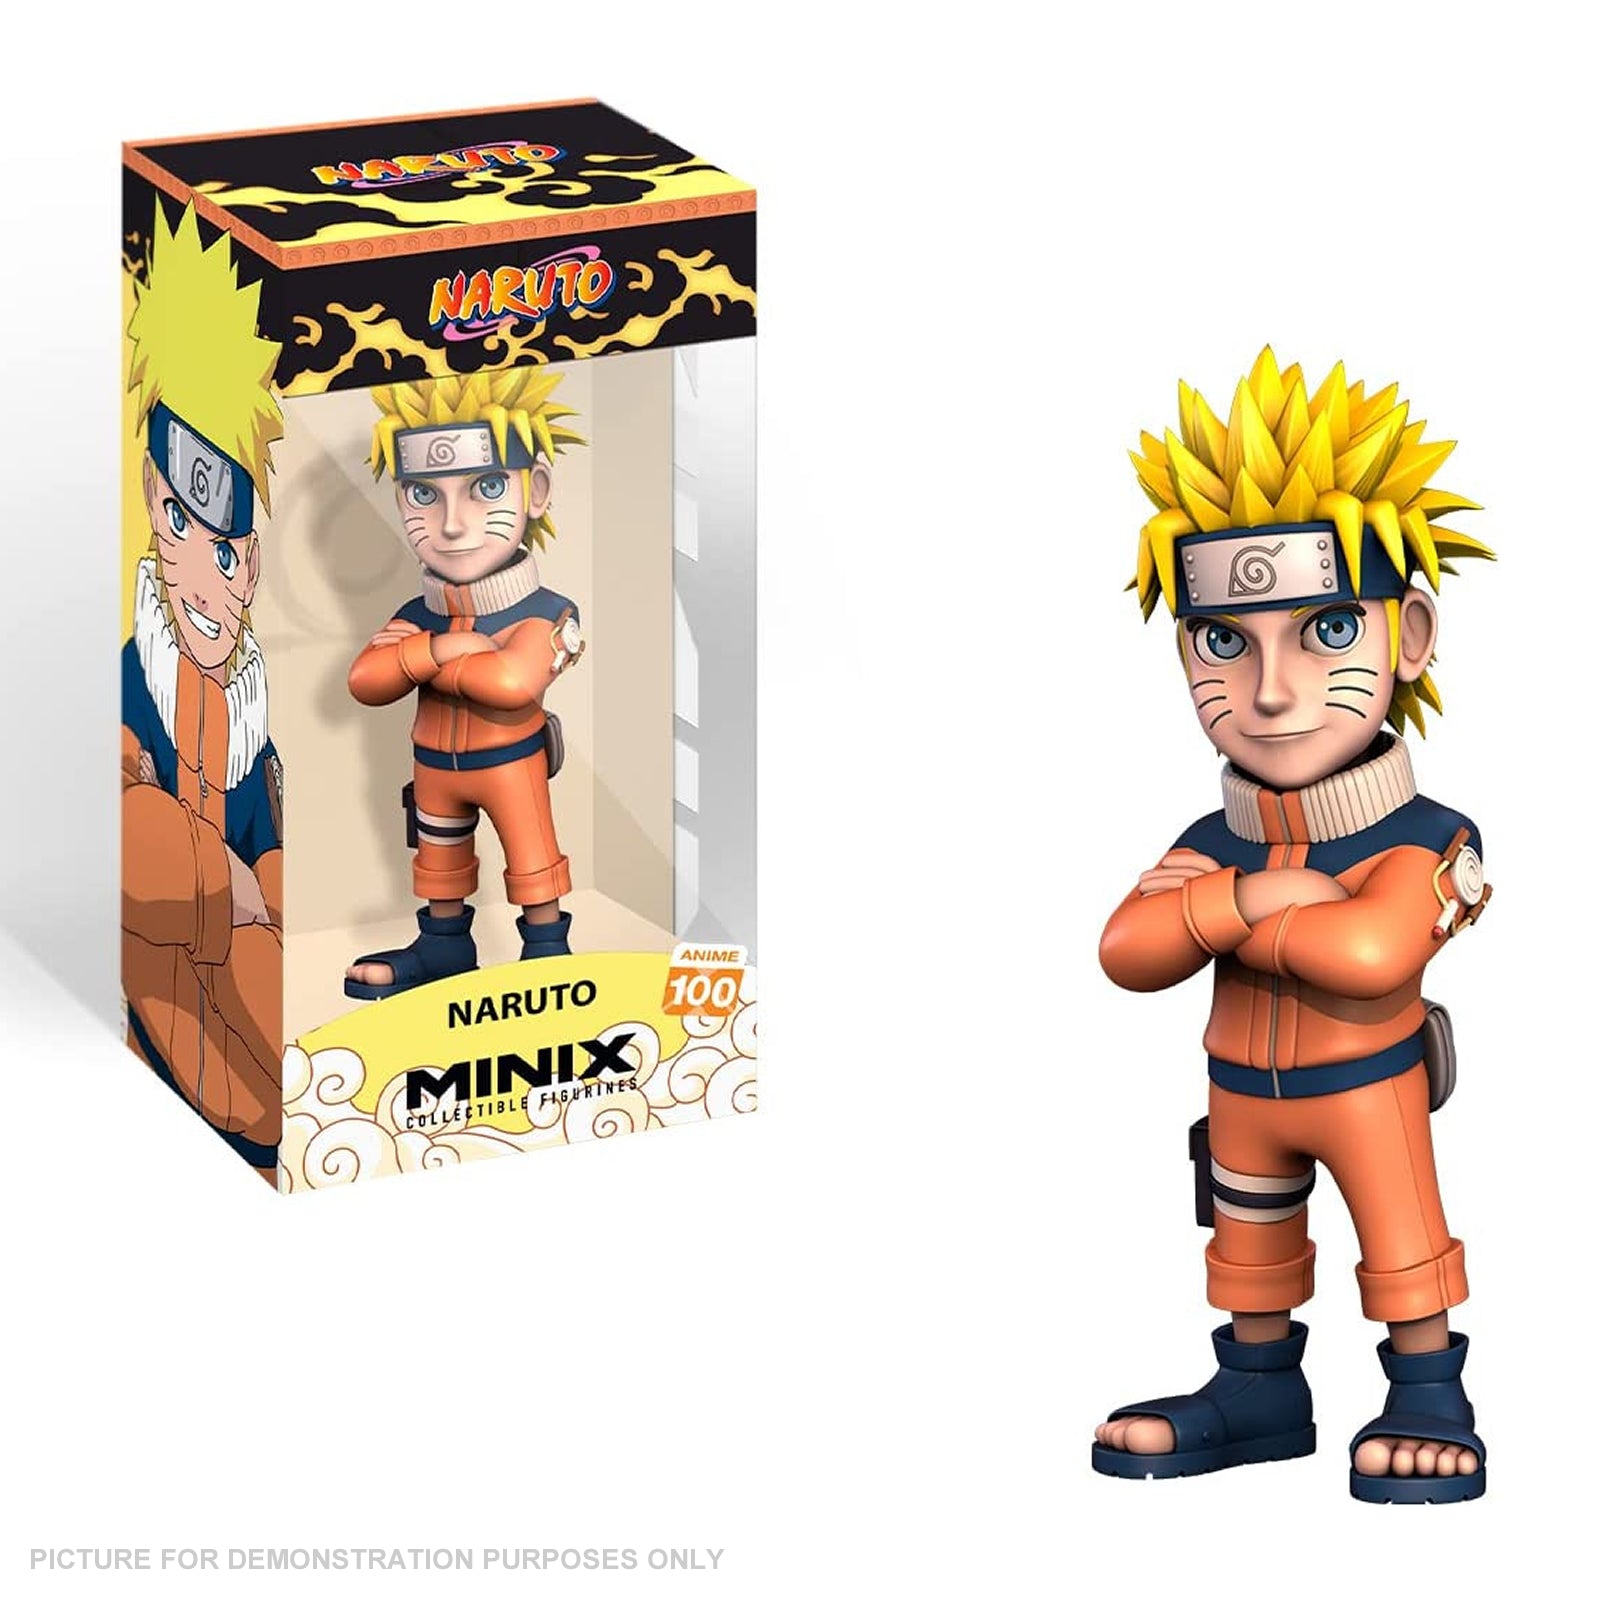 MINIX Collectable Figurine - NARUTO - Naruto – Online Coins and Collectables